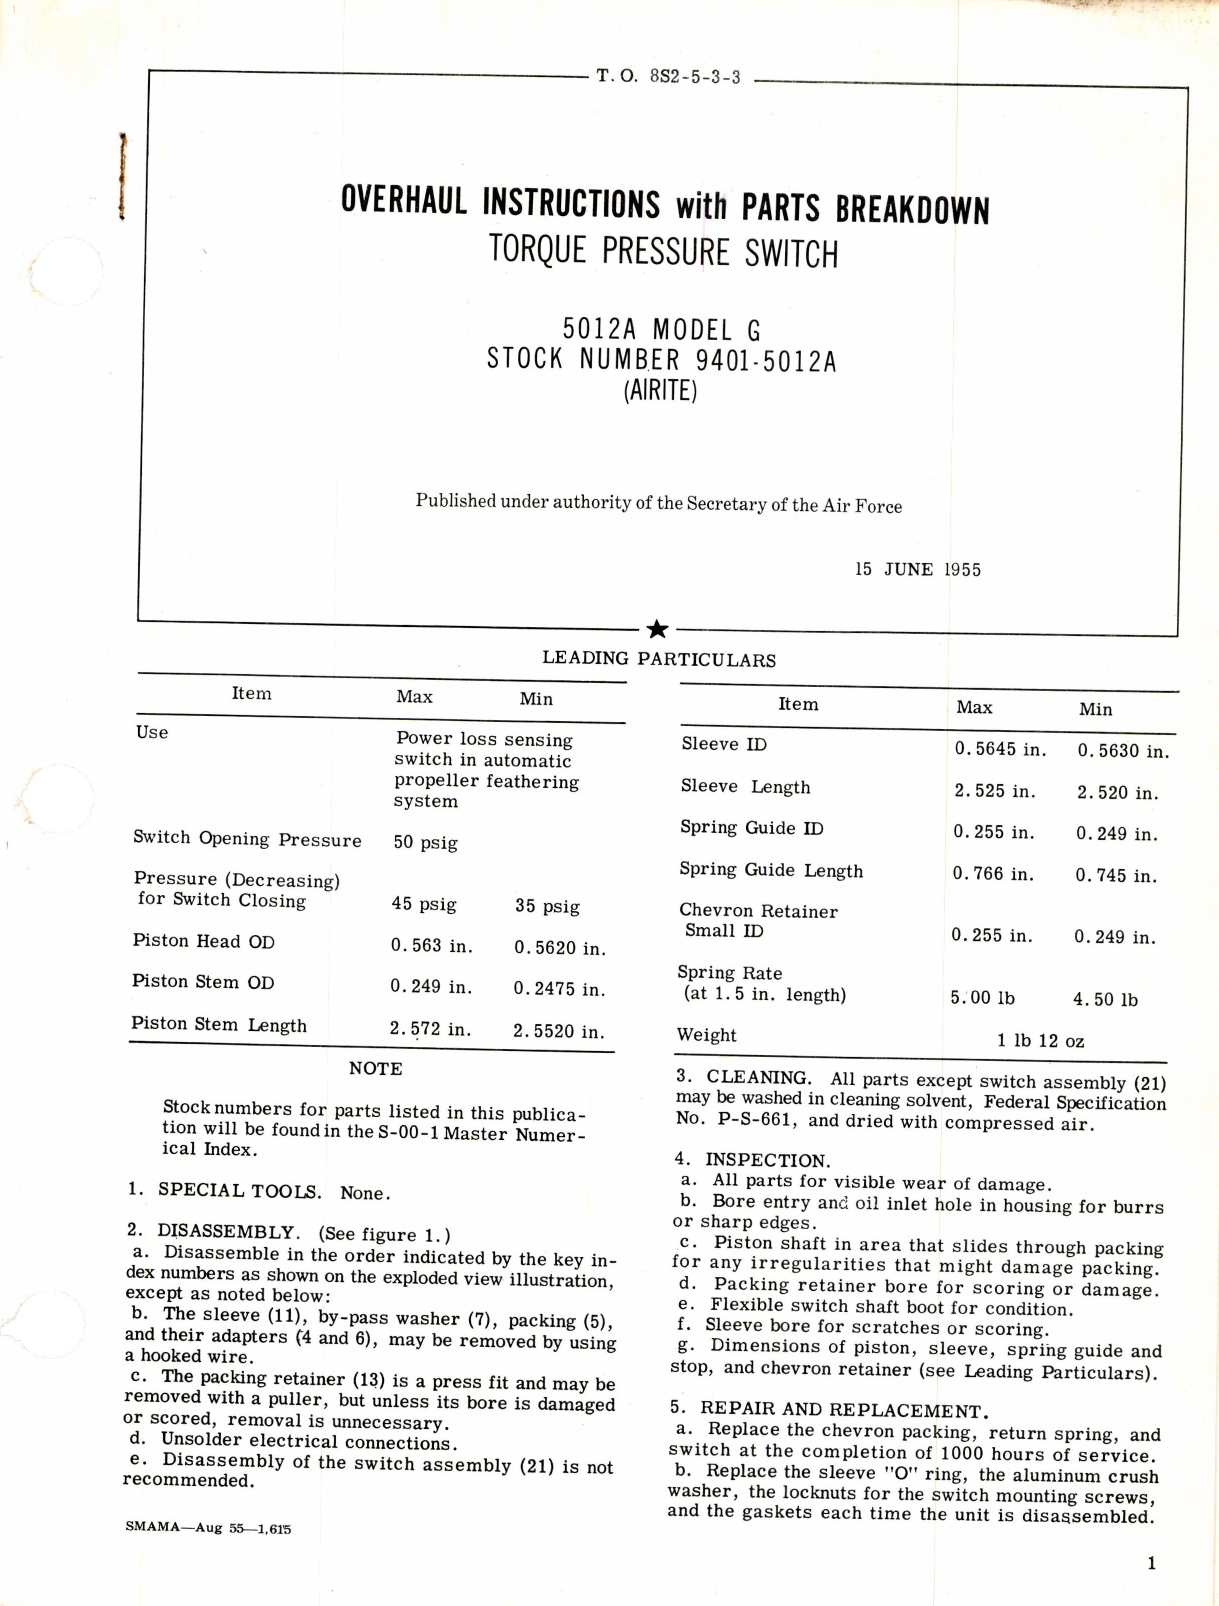 Sample page 1 from AirCorps Library document: Torque Pressure Switch 5012A Model G, Stock No. 9401-5012A